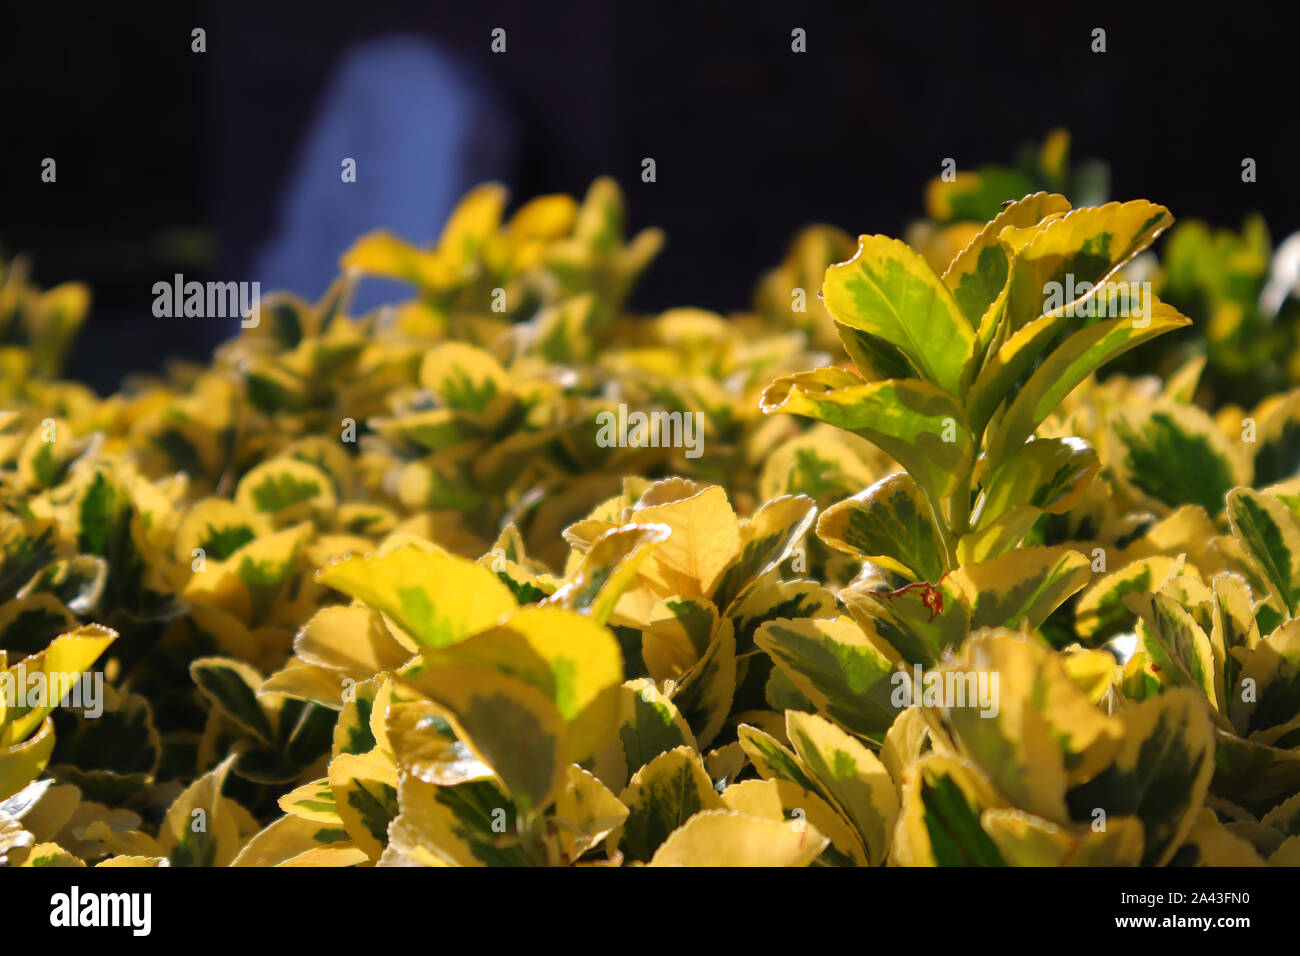 A Yellow and Green Leaves Under the Sunlight in a Garden in Istanbul. Stock Photo